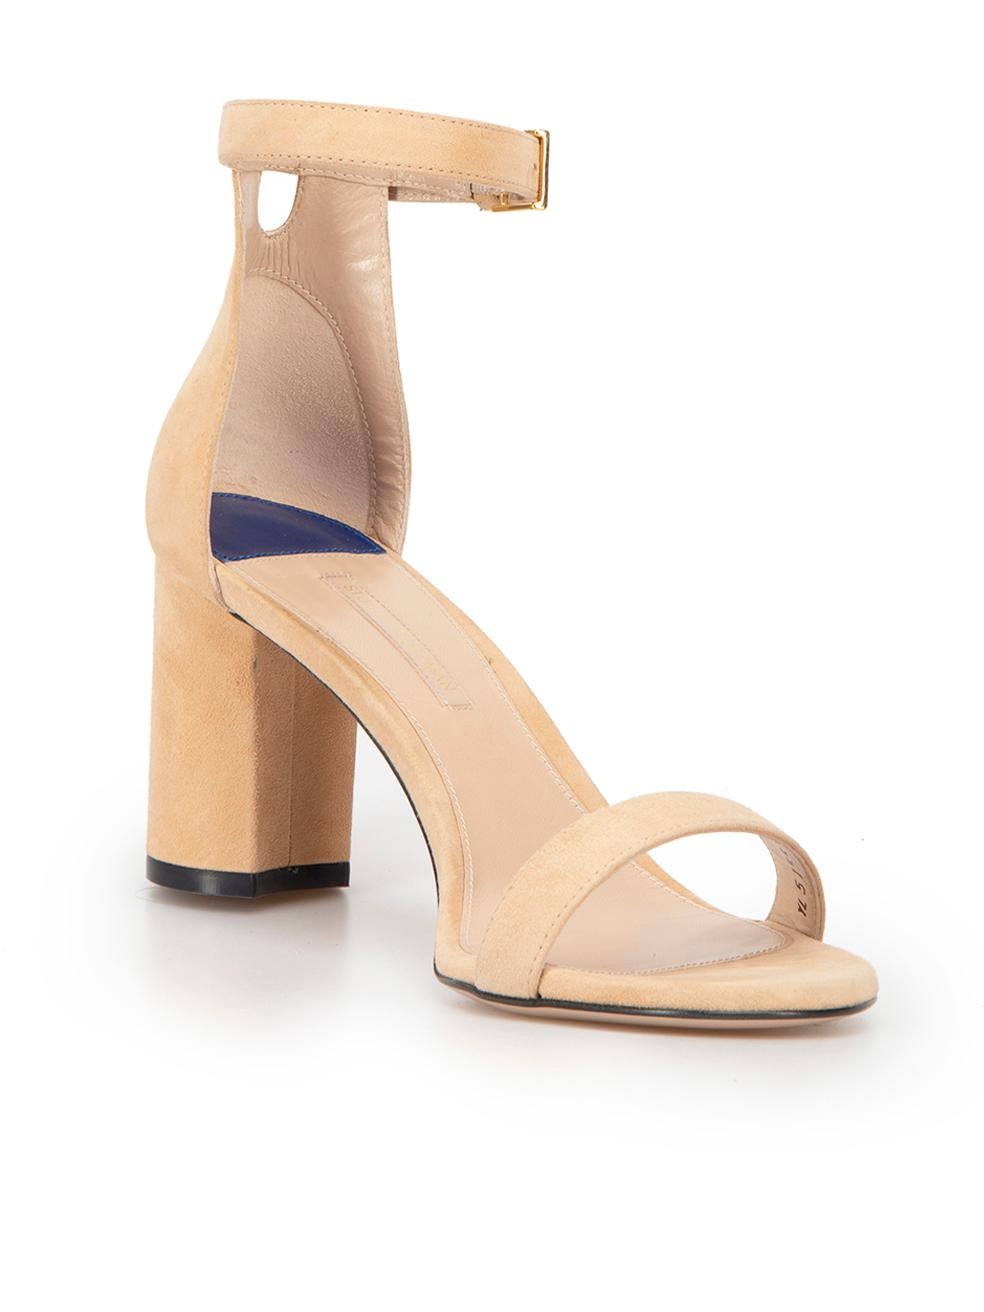 CONDITION is Very good. Hardly any visible wear to sandals is evident on this used Stuart Weitzman designer resale item. 
 
 Details
  Beige
 Suede
 Sandals
 Open toe
 High block heel
 Ankle strap buckle closure
 
 
 Made in Spain
 
 Composition
